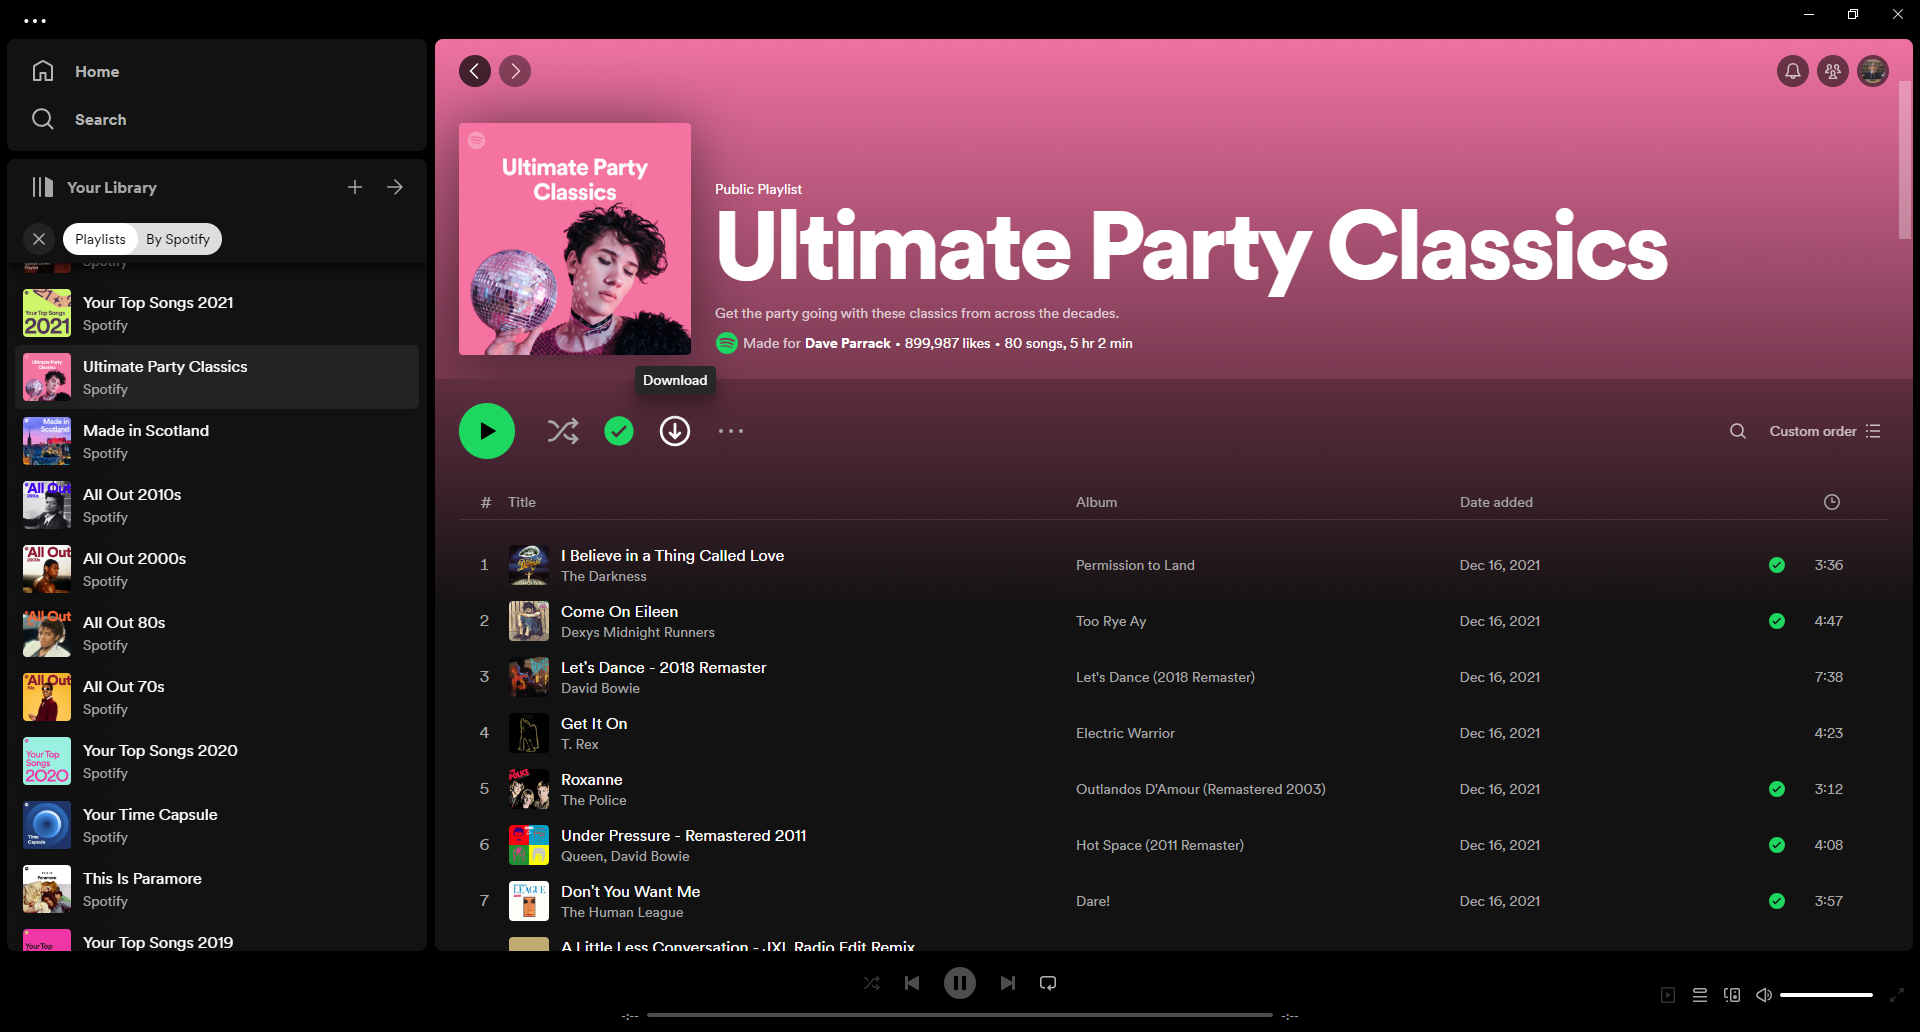 How to Download Spotify Songs to Listen Offline